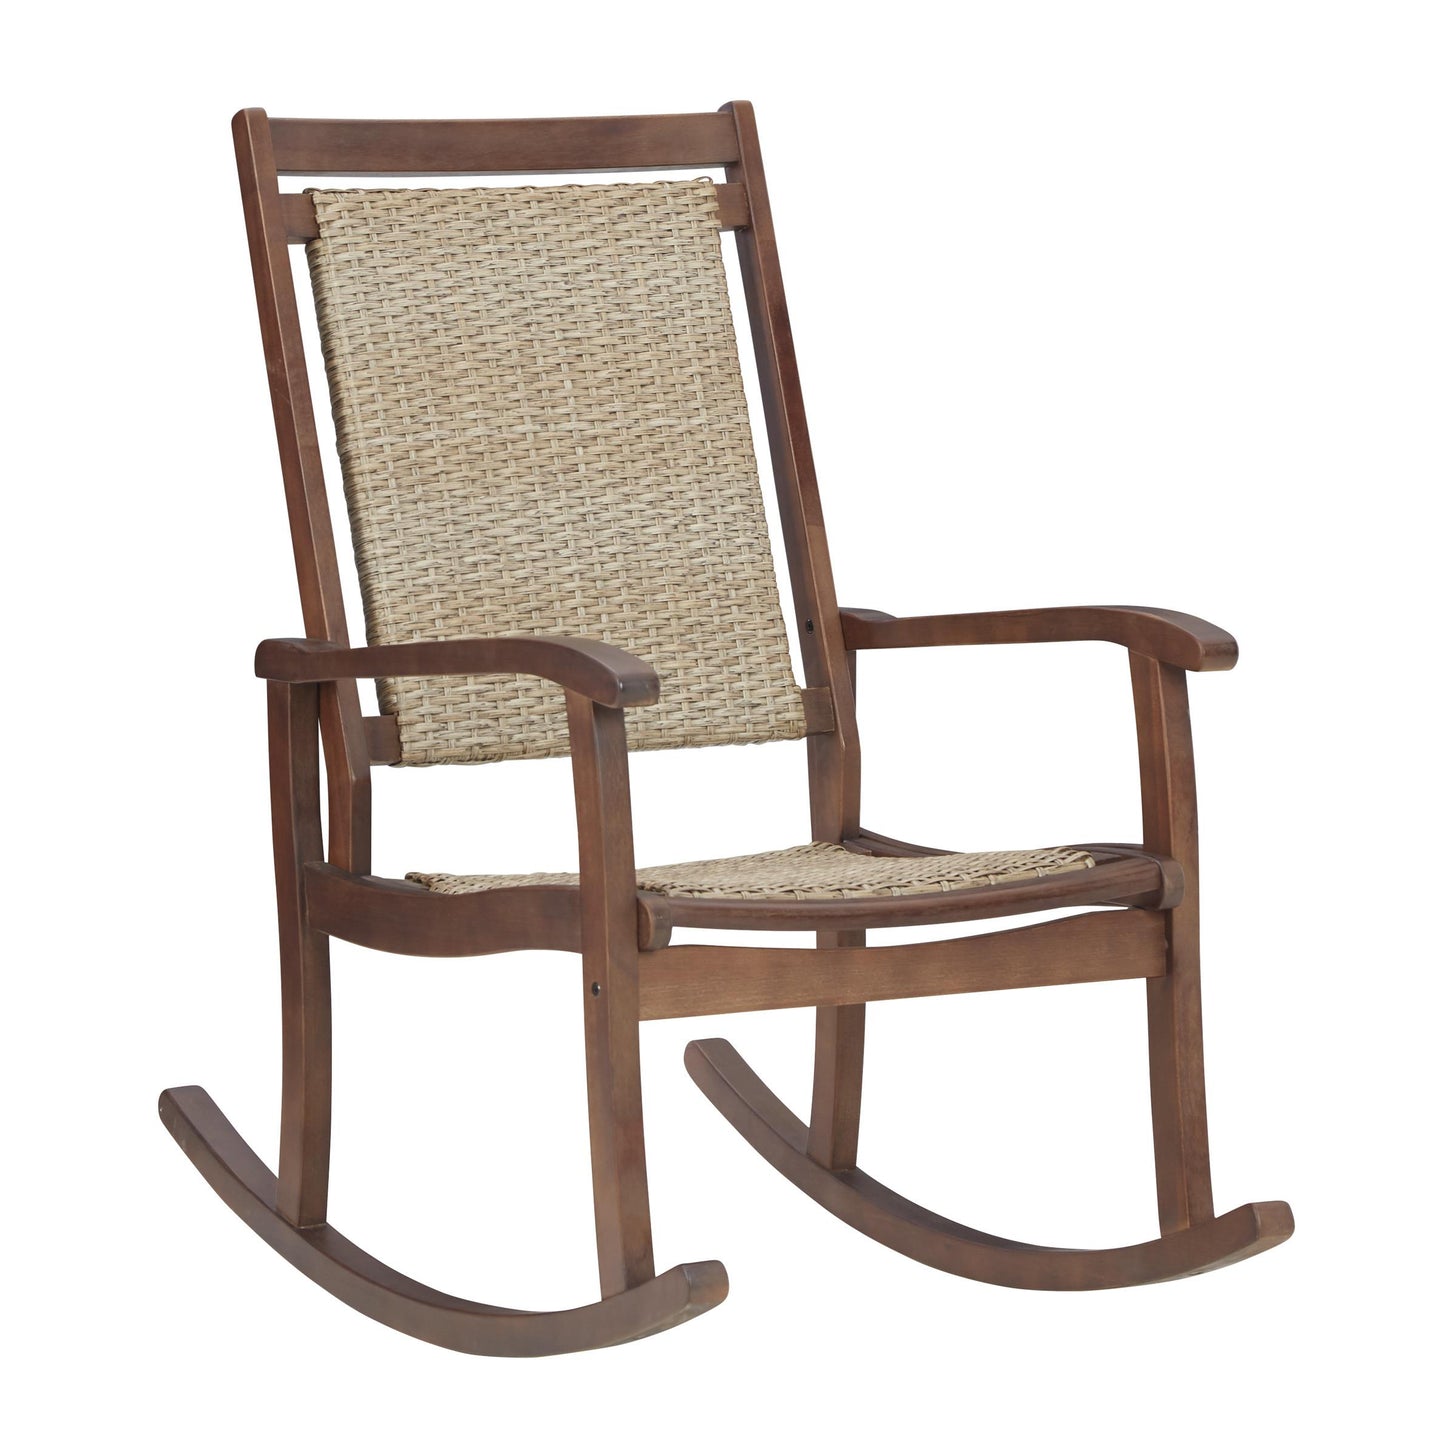 Signature Design by Ashley Outdoor Seating Rocking Chairs P168-827 IMAGE 1